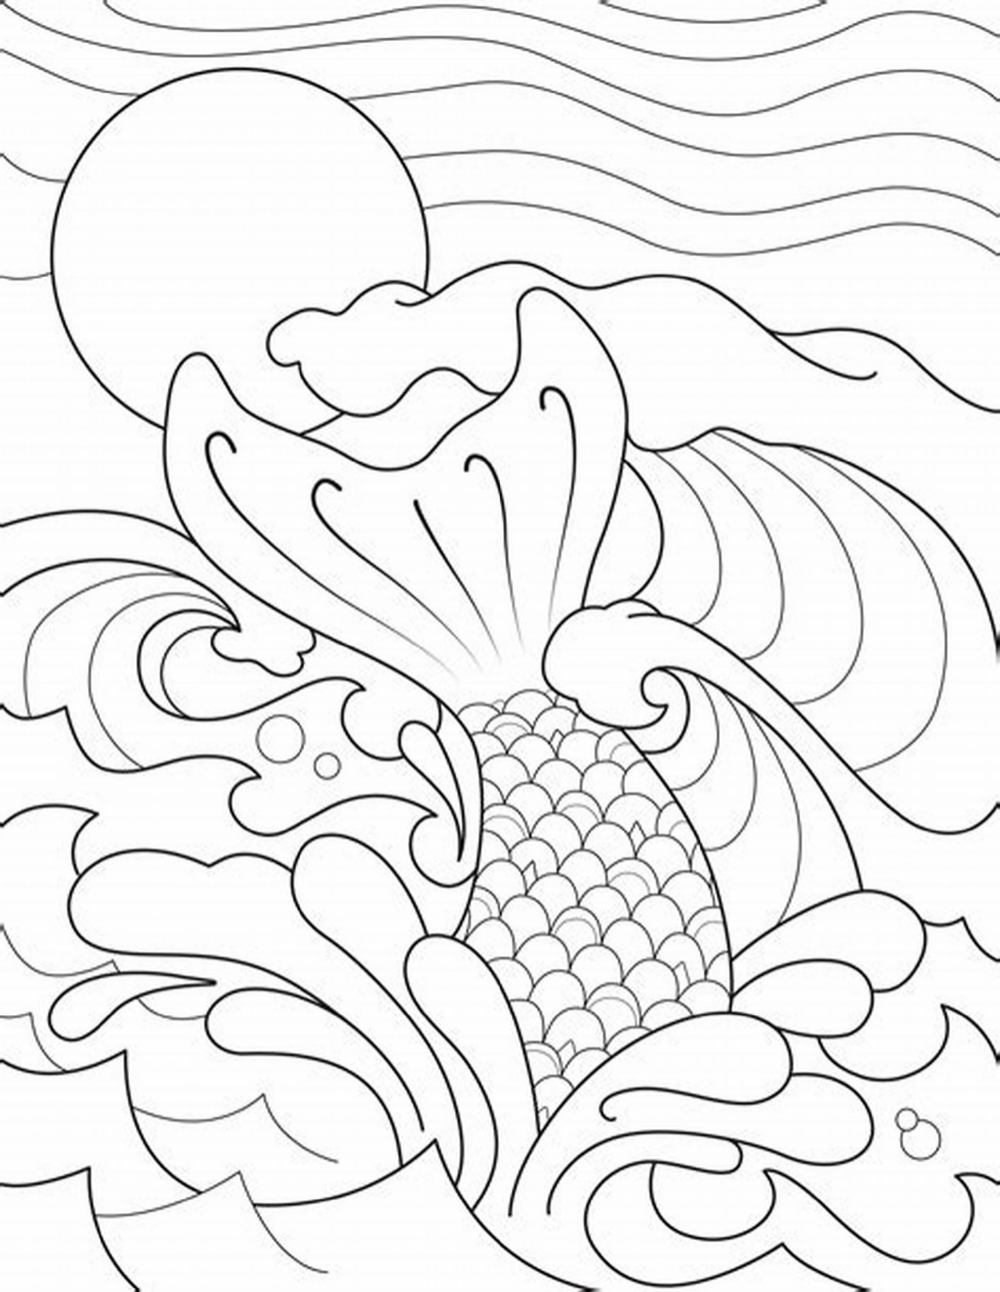 Mermaid Tail Coloring Page for Adults | K5 Worksheets | Mermaid coloring  pages, Halloween coloring pages printable, Free halloween coloring pages